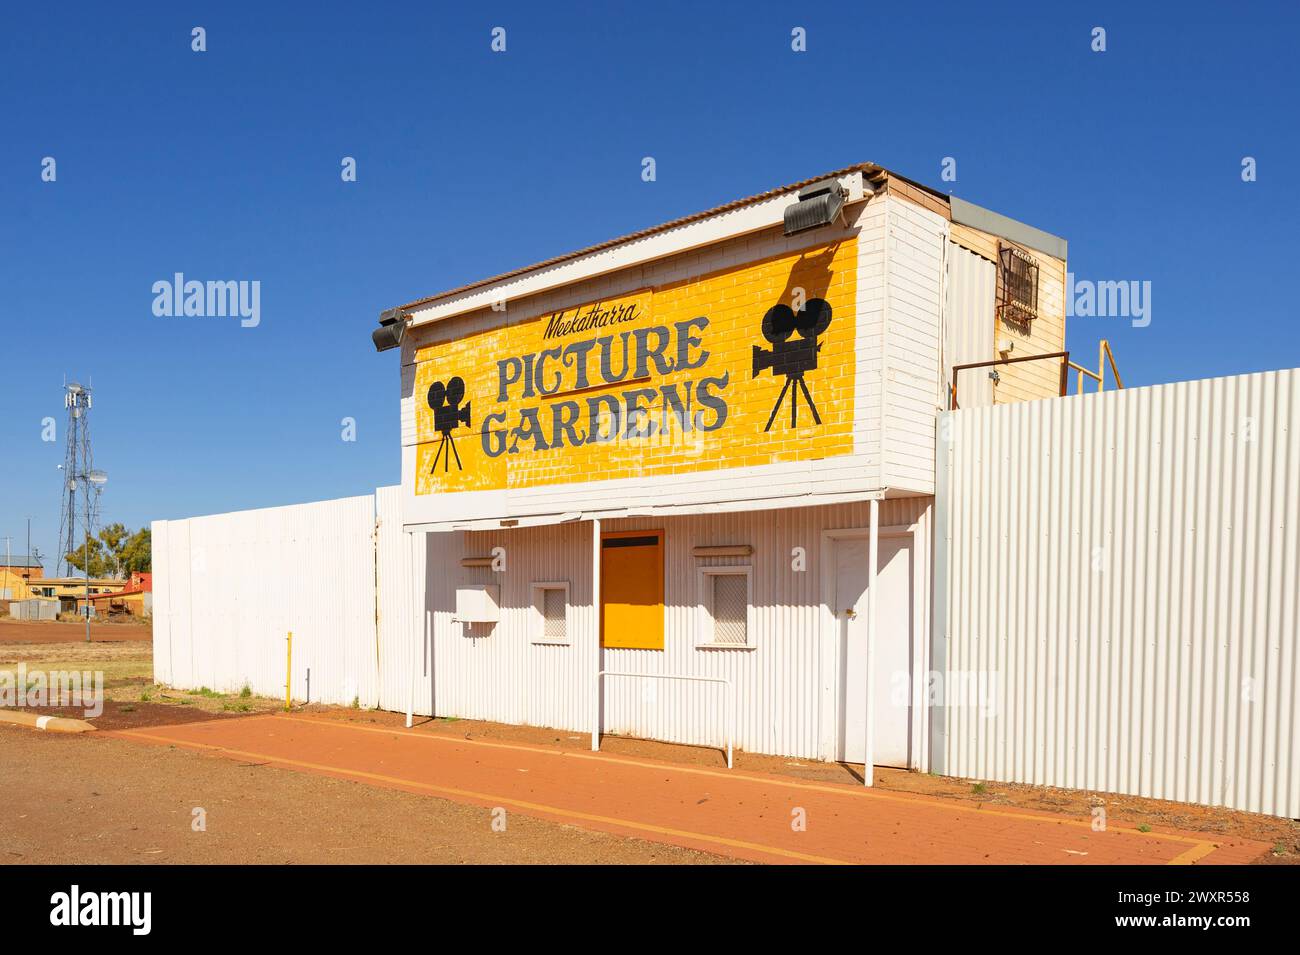 View of Meekatharra Picture Gardens, an old cinema or movie theatre in the rural small town of Meekatharra, Western Australia, WA, Australia Stock Photo